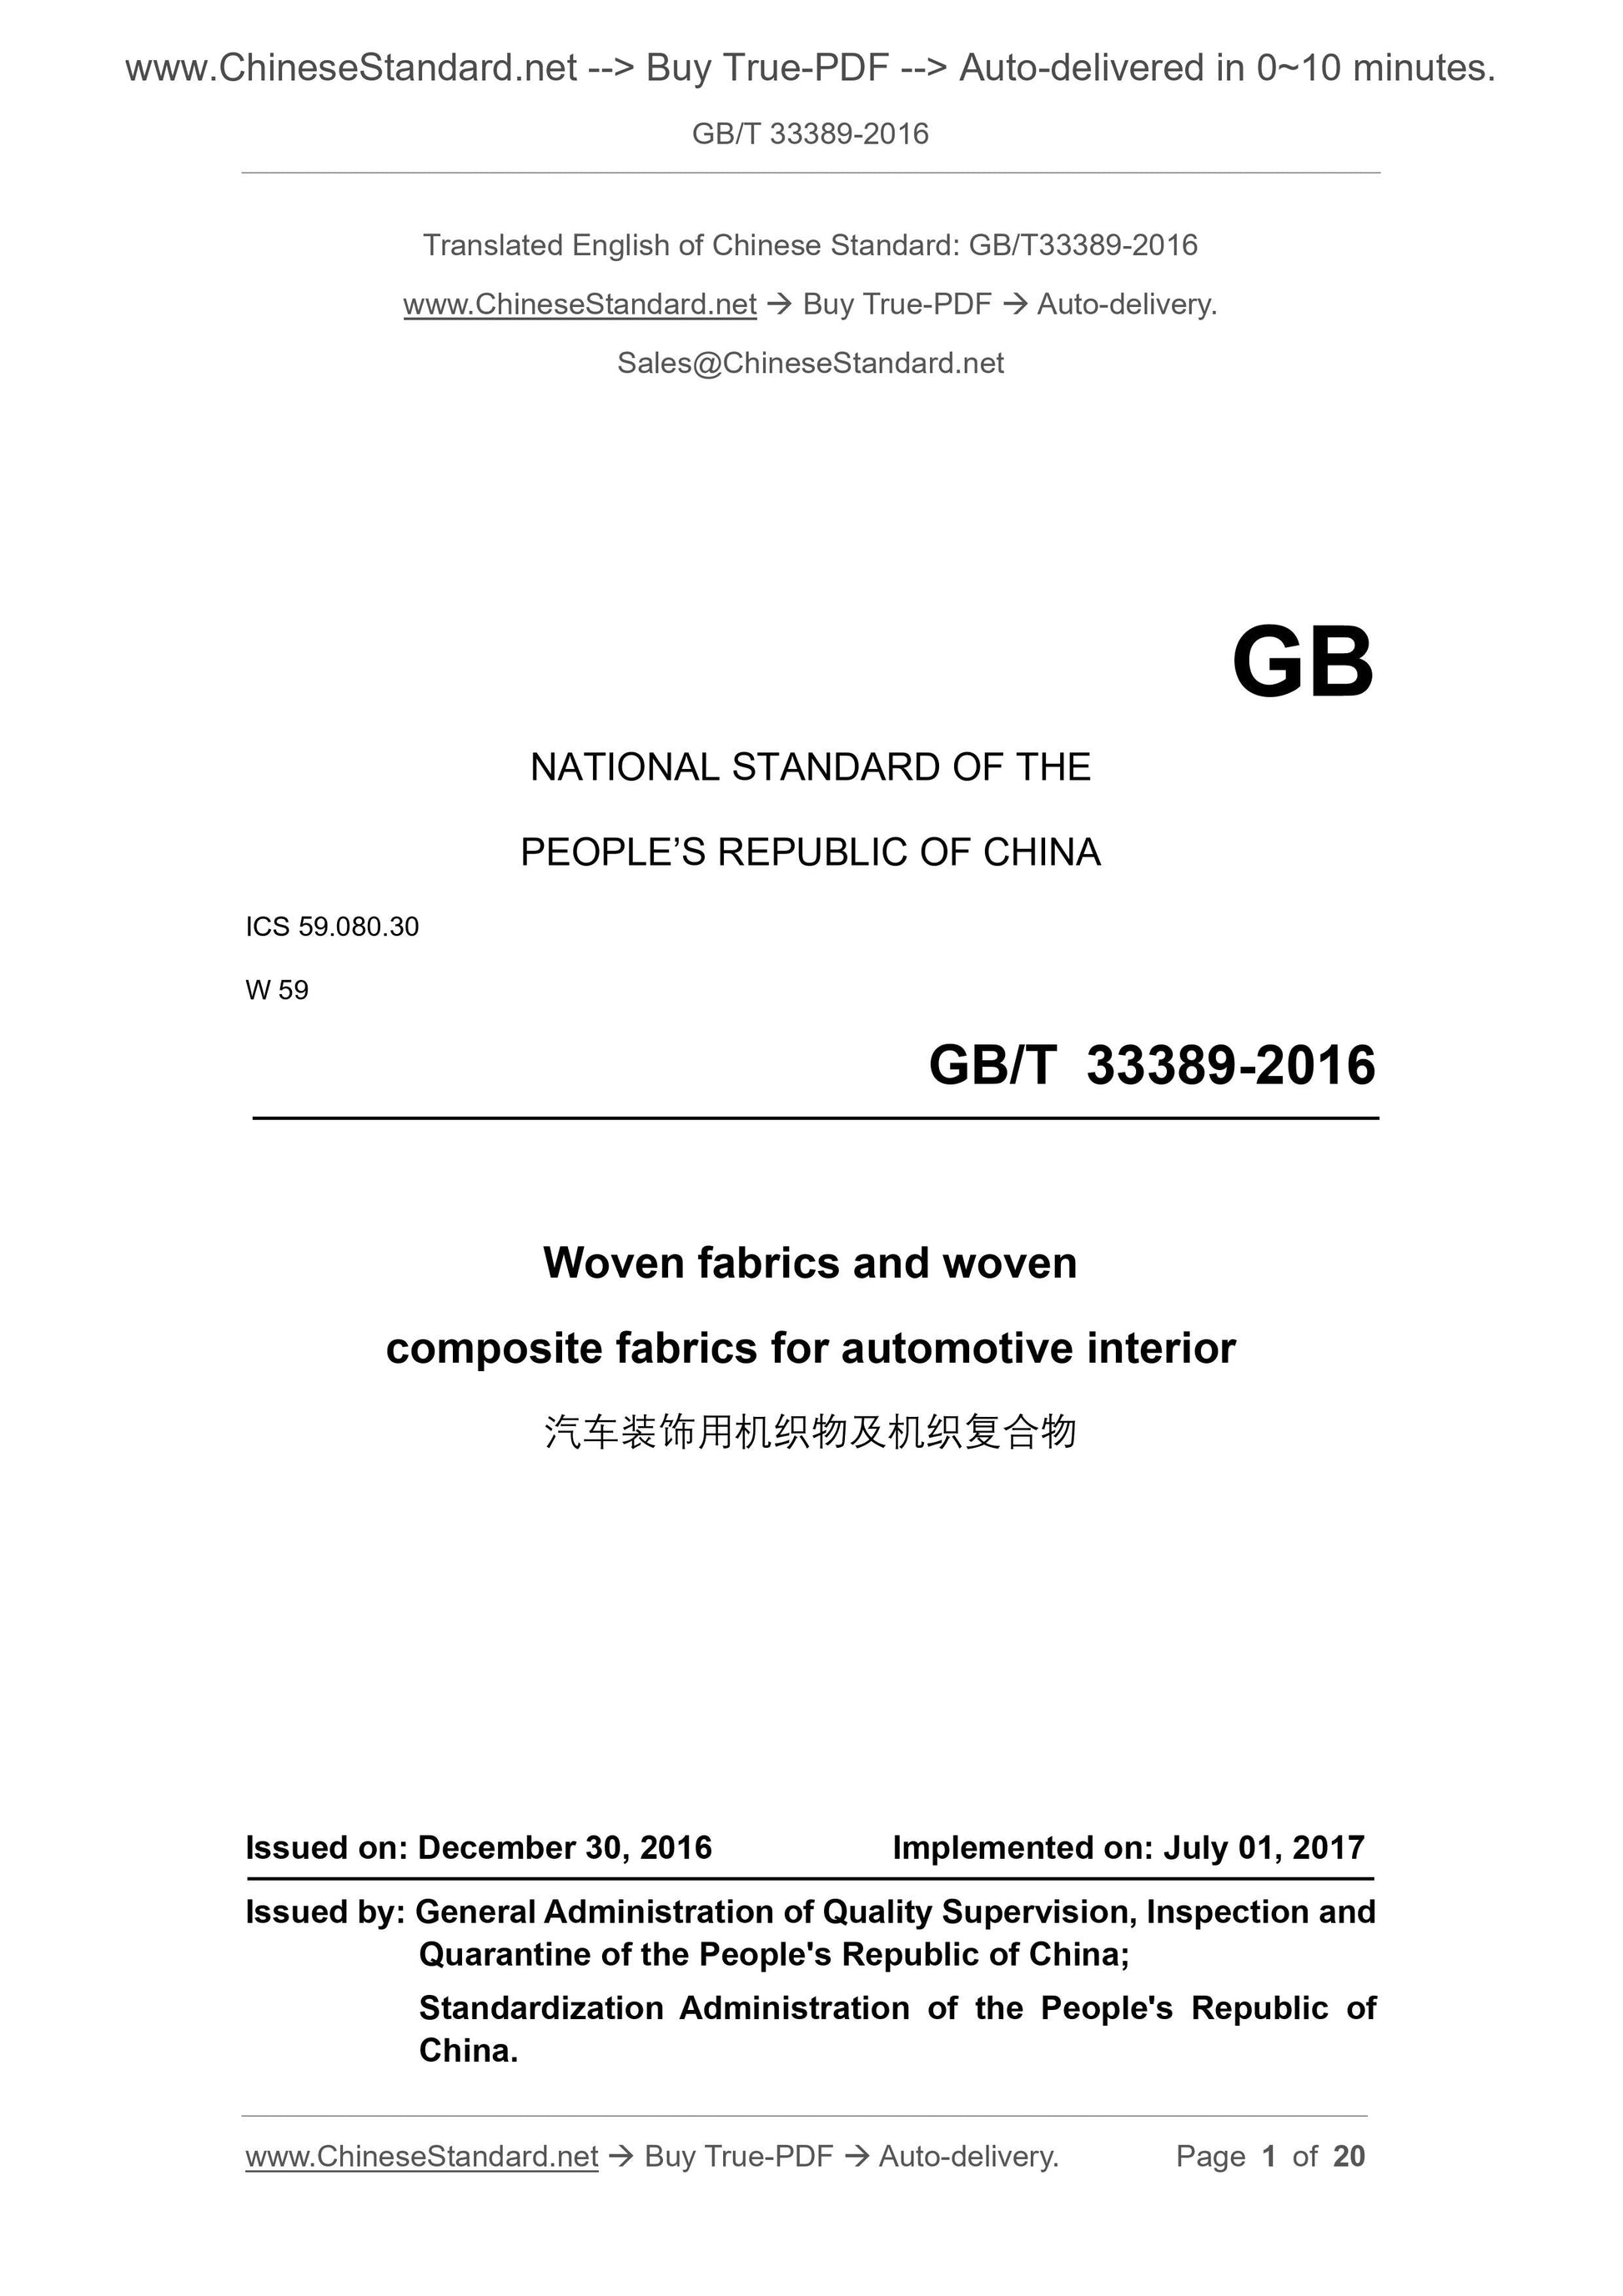 GB/T 33389-2016 Page 1